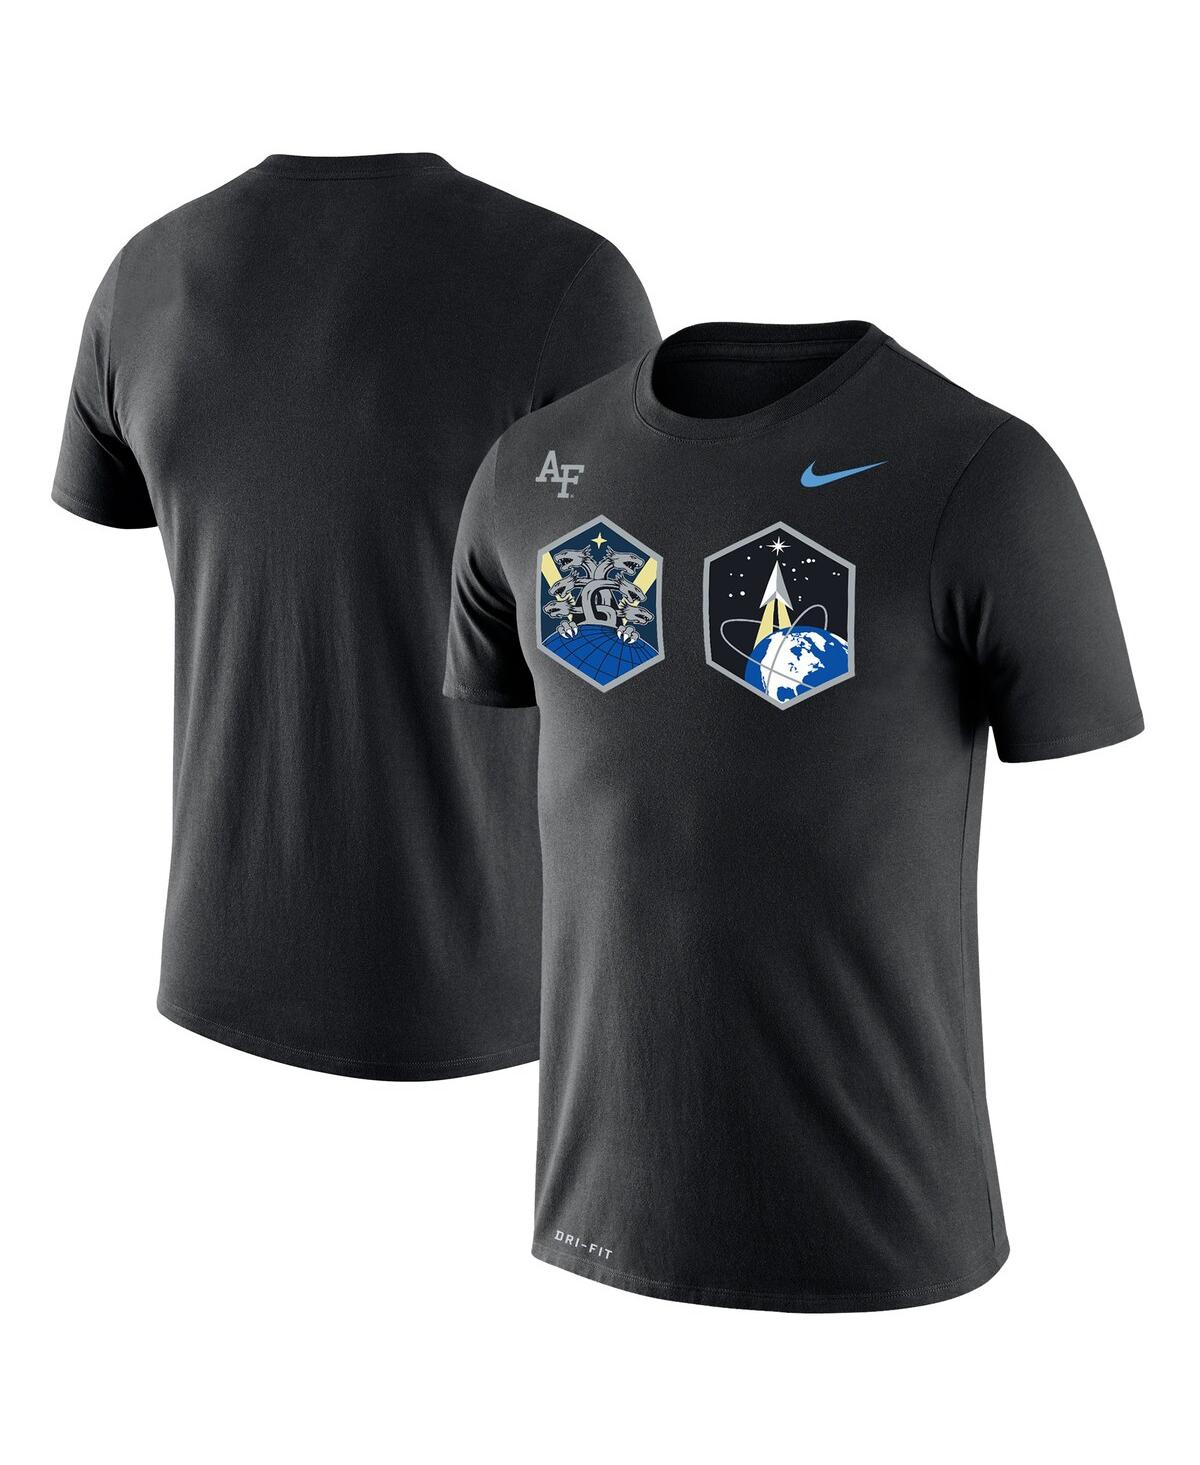 Men's Nike Black Air Force Falcons Space Force Rivalry Badge T-shirt